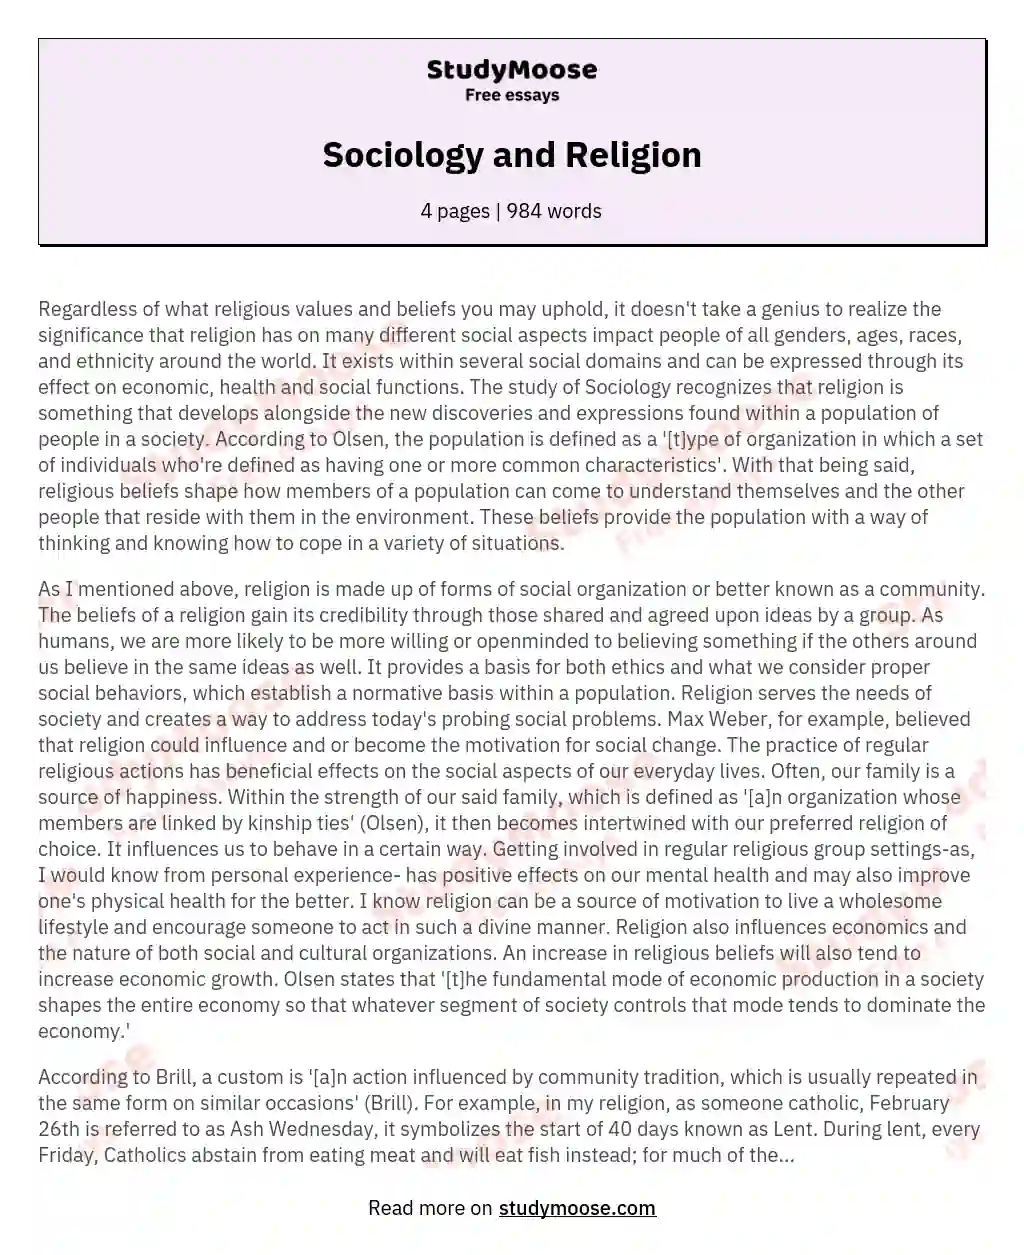 Sociology and Religion essay